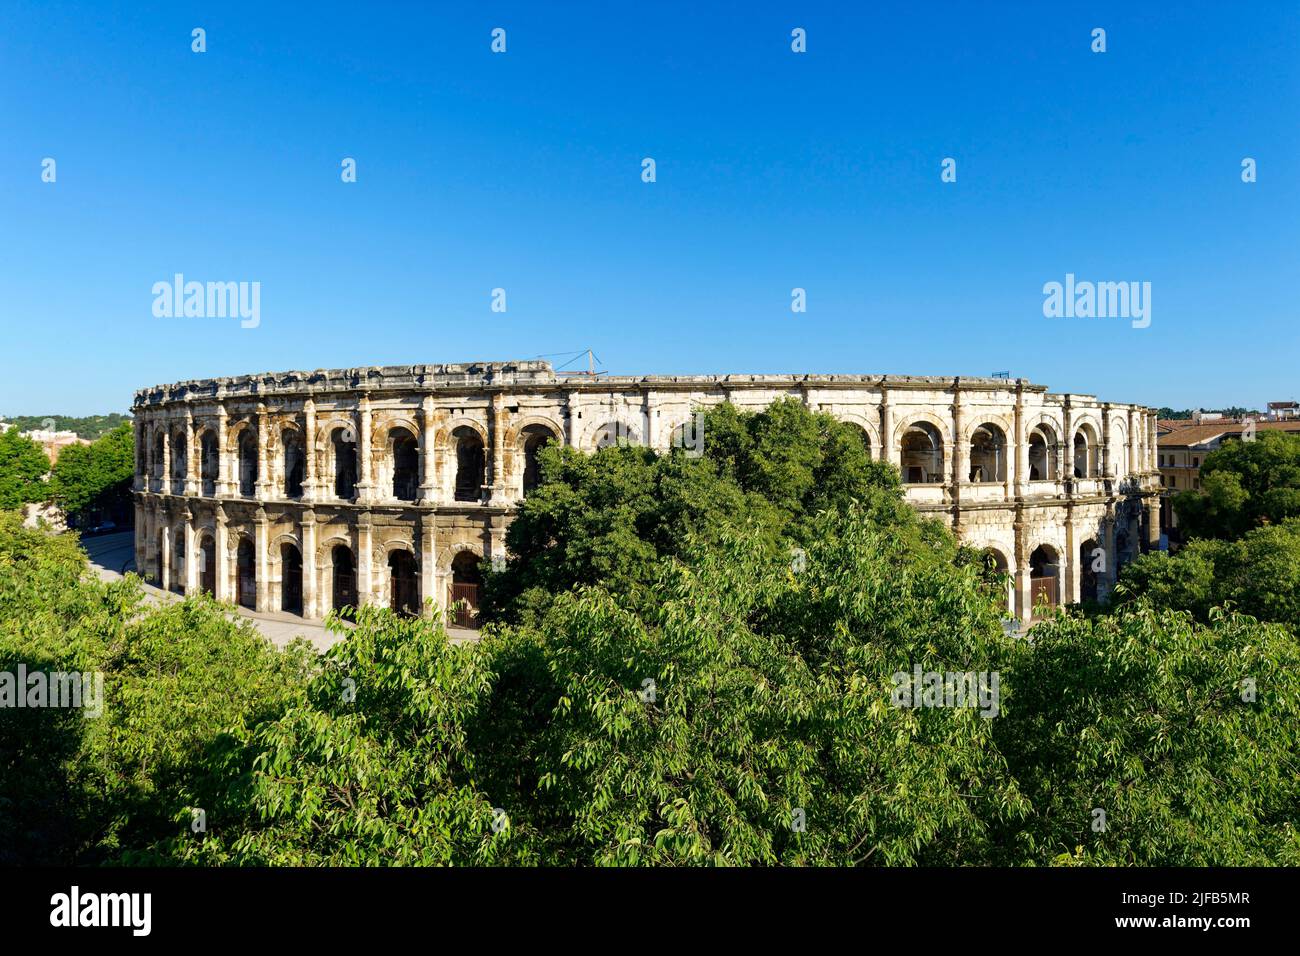 France, Gard, Nimes, Place des Arenes, The Arenas Stock Photo